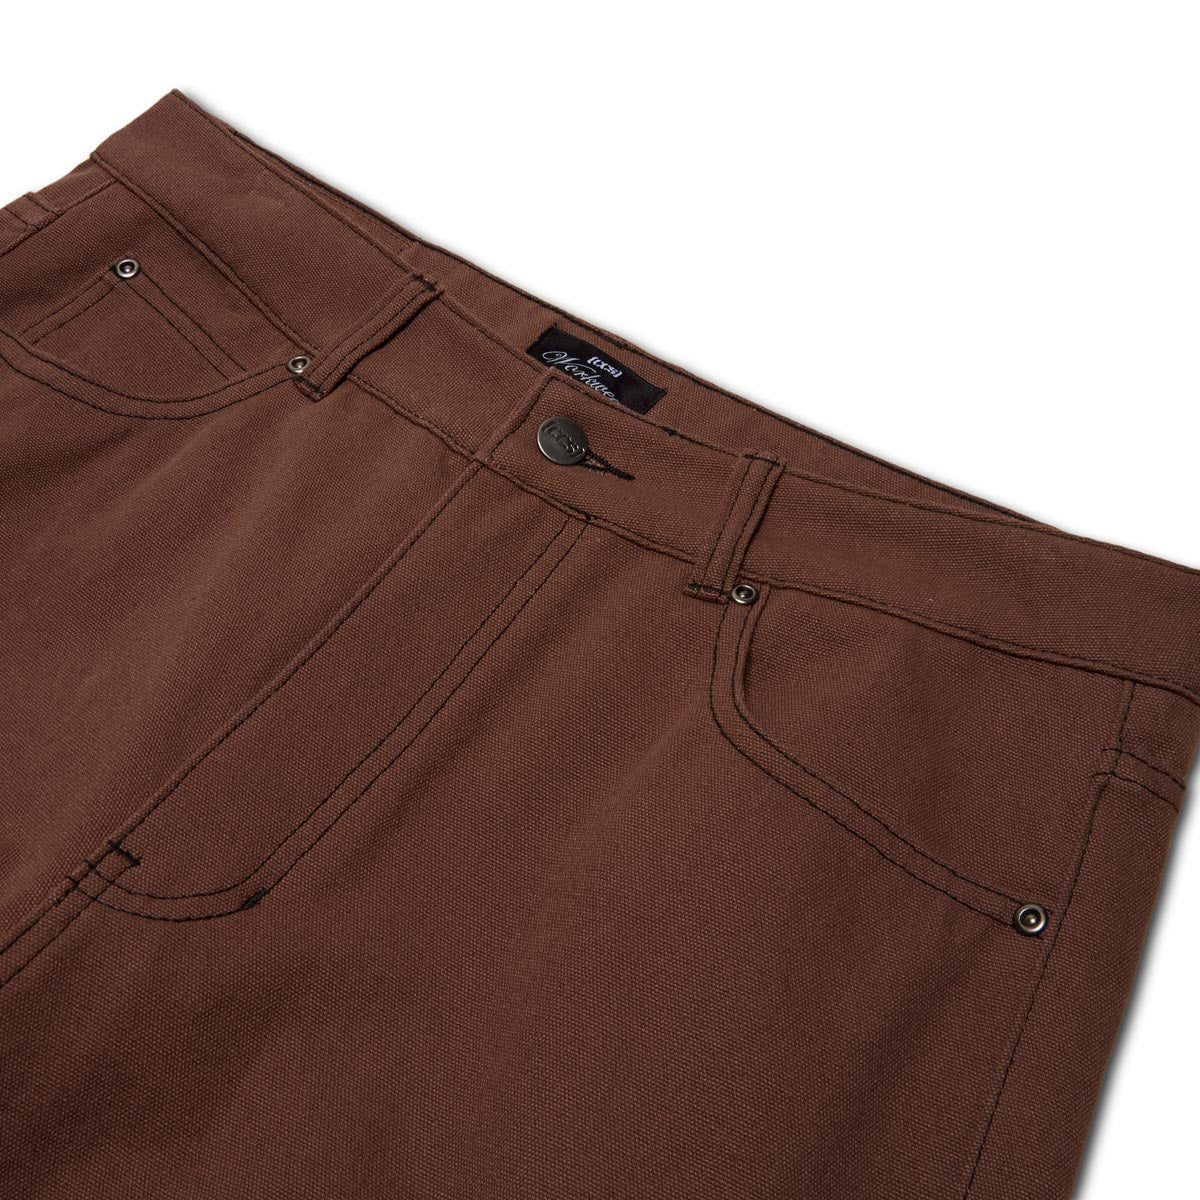 CCS Double Knee Original Relaxed Canvas Pants - Brown/Black image 5